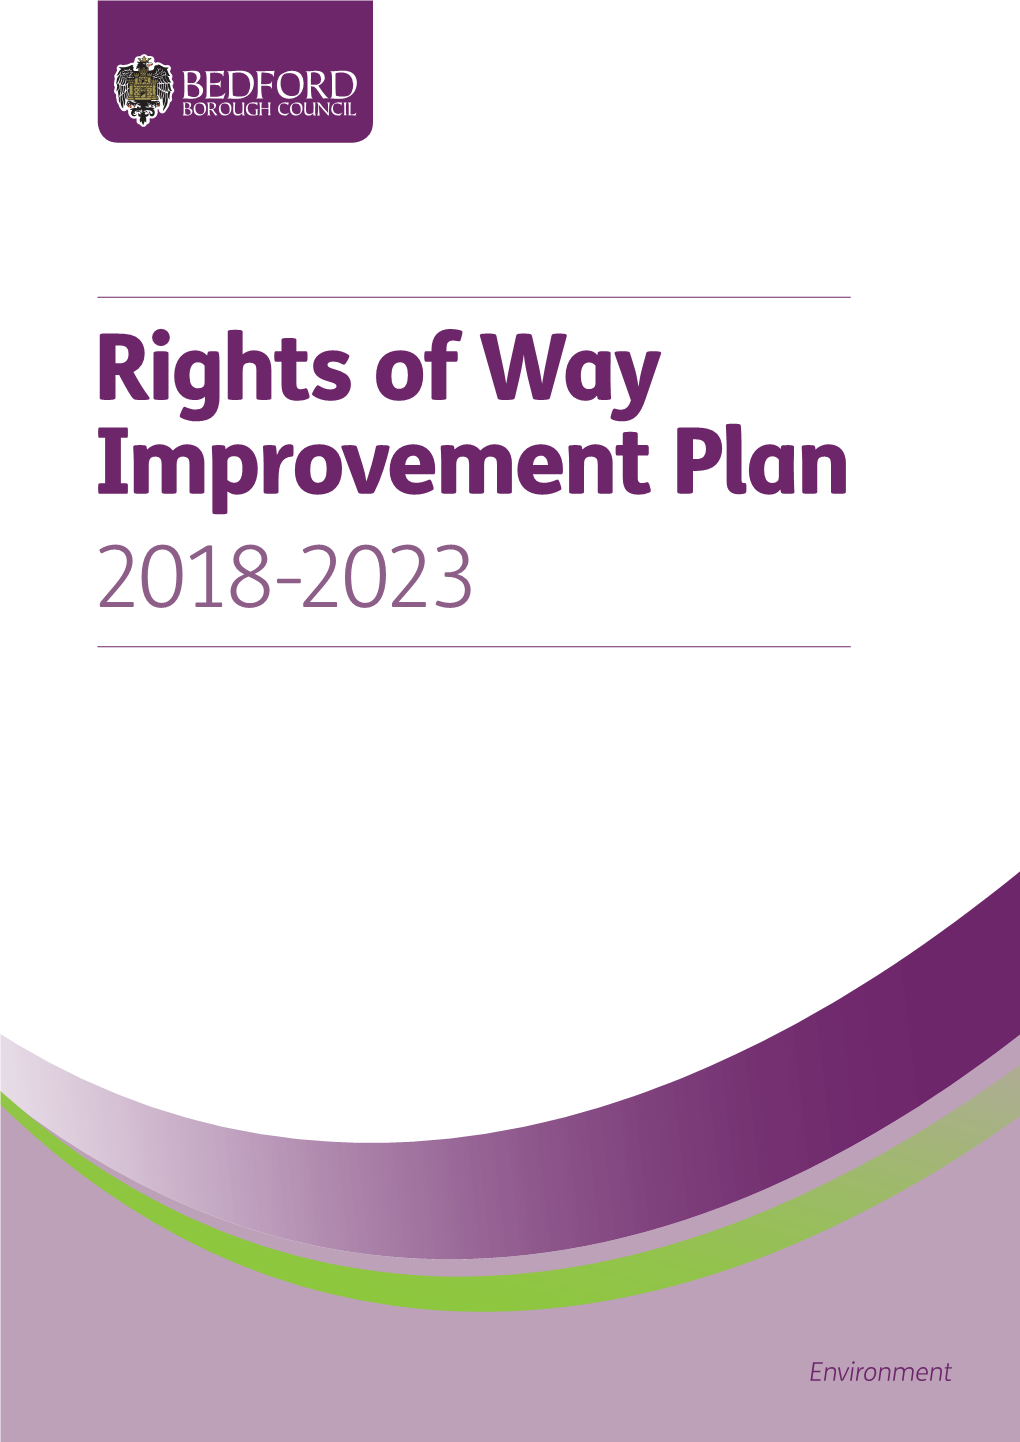 Rights of Way Improvement Plan 2018-2023